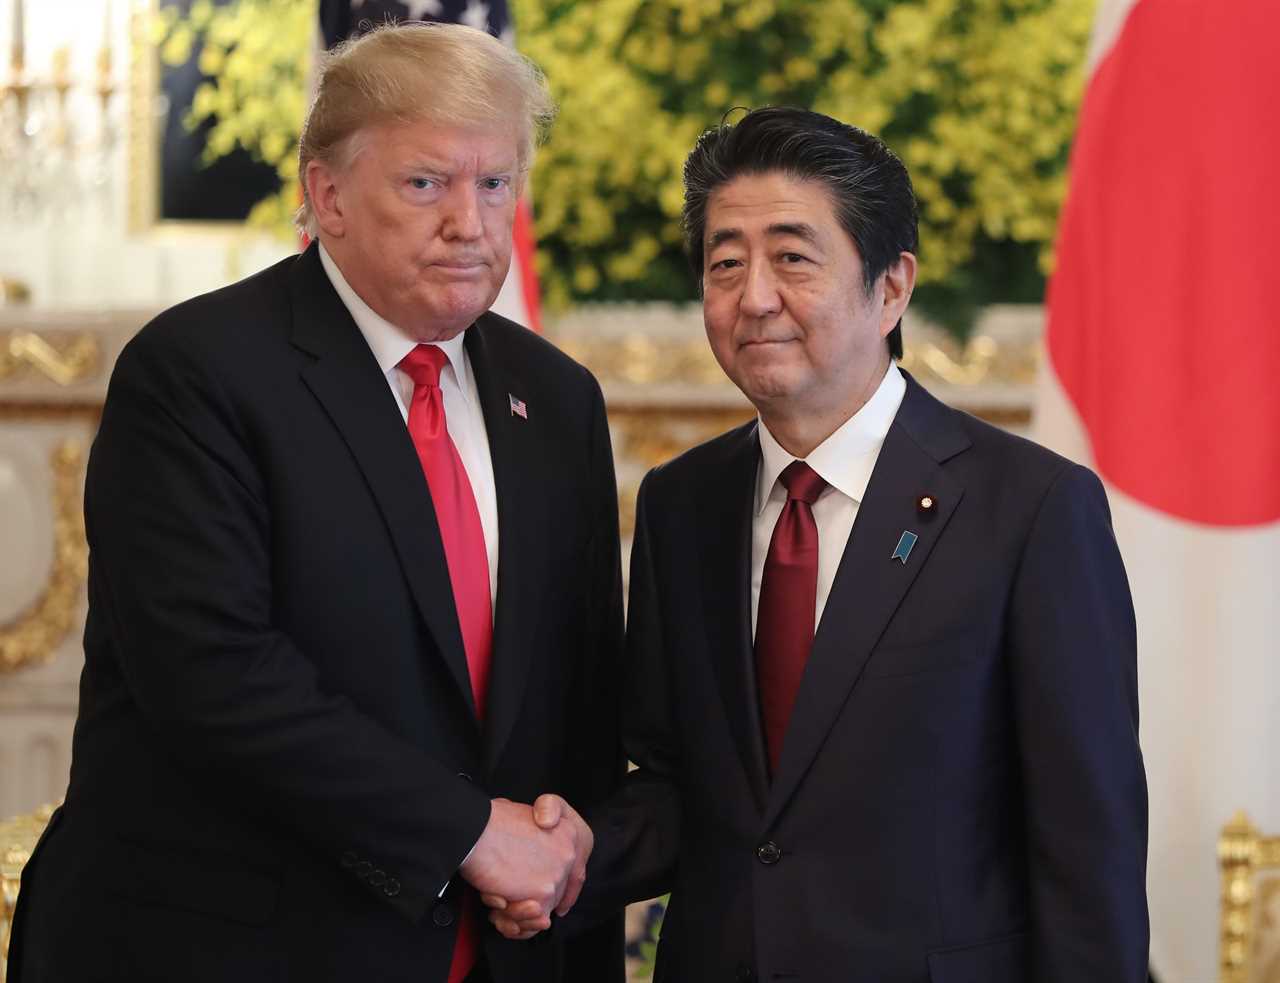 Trump mourns ‘bad news’ of Abe assassination